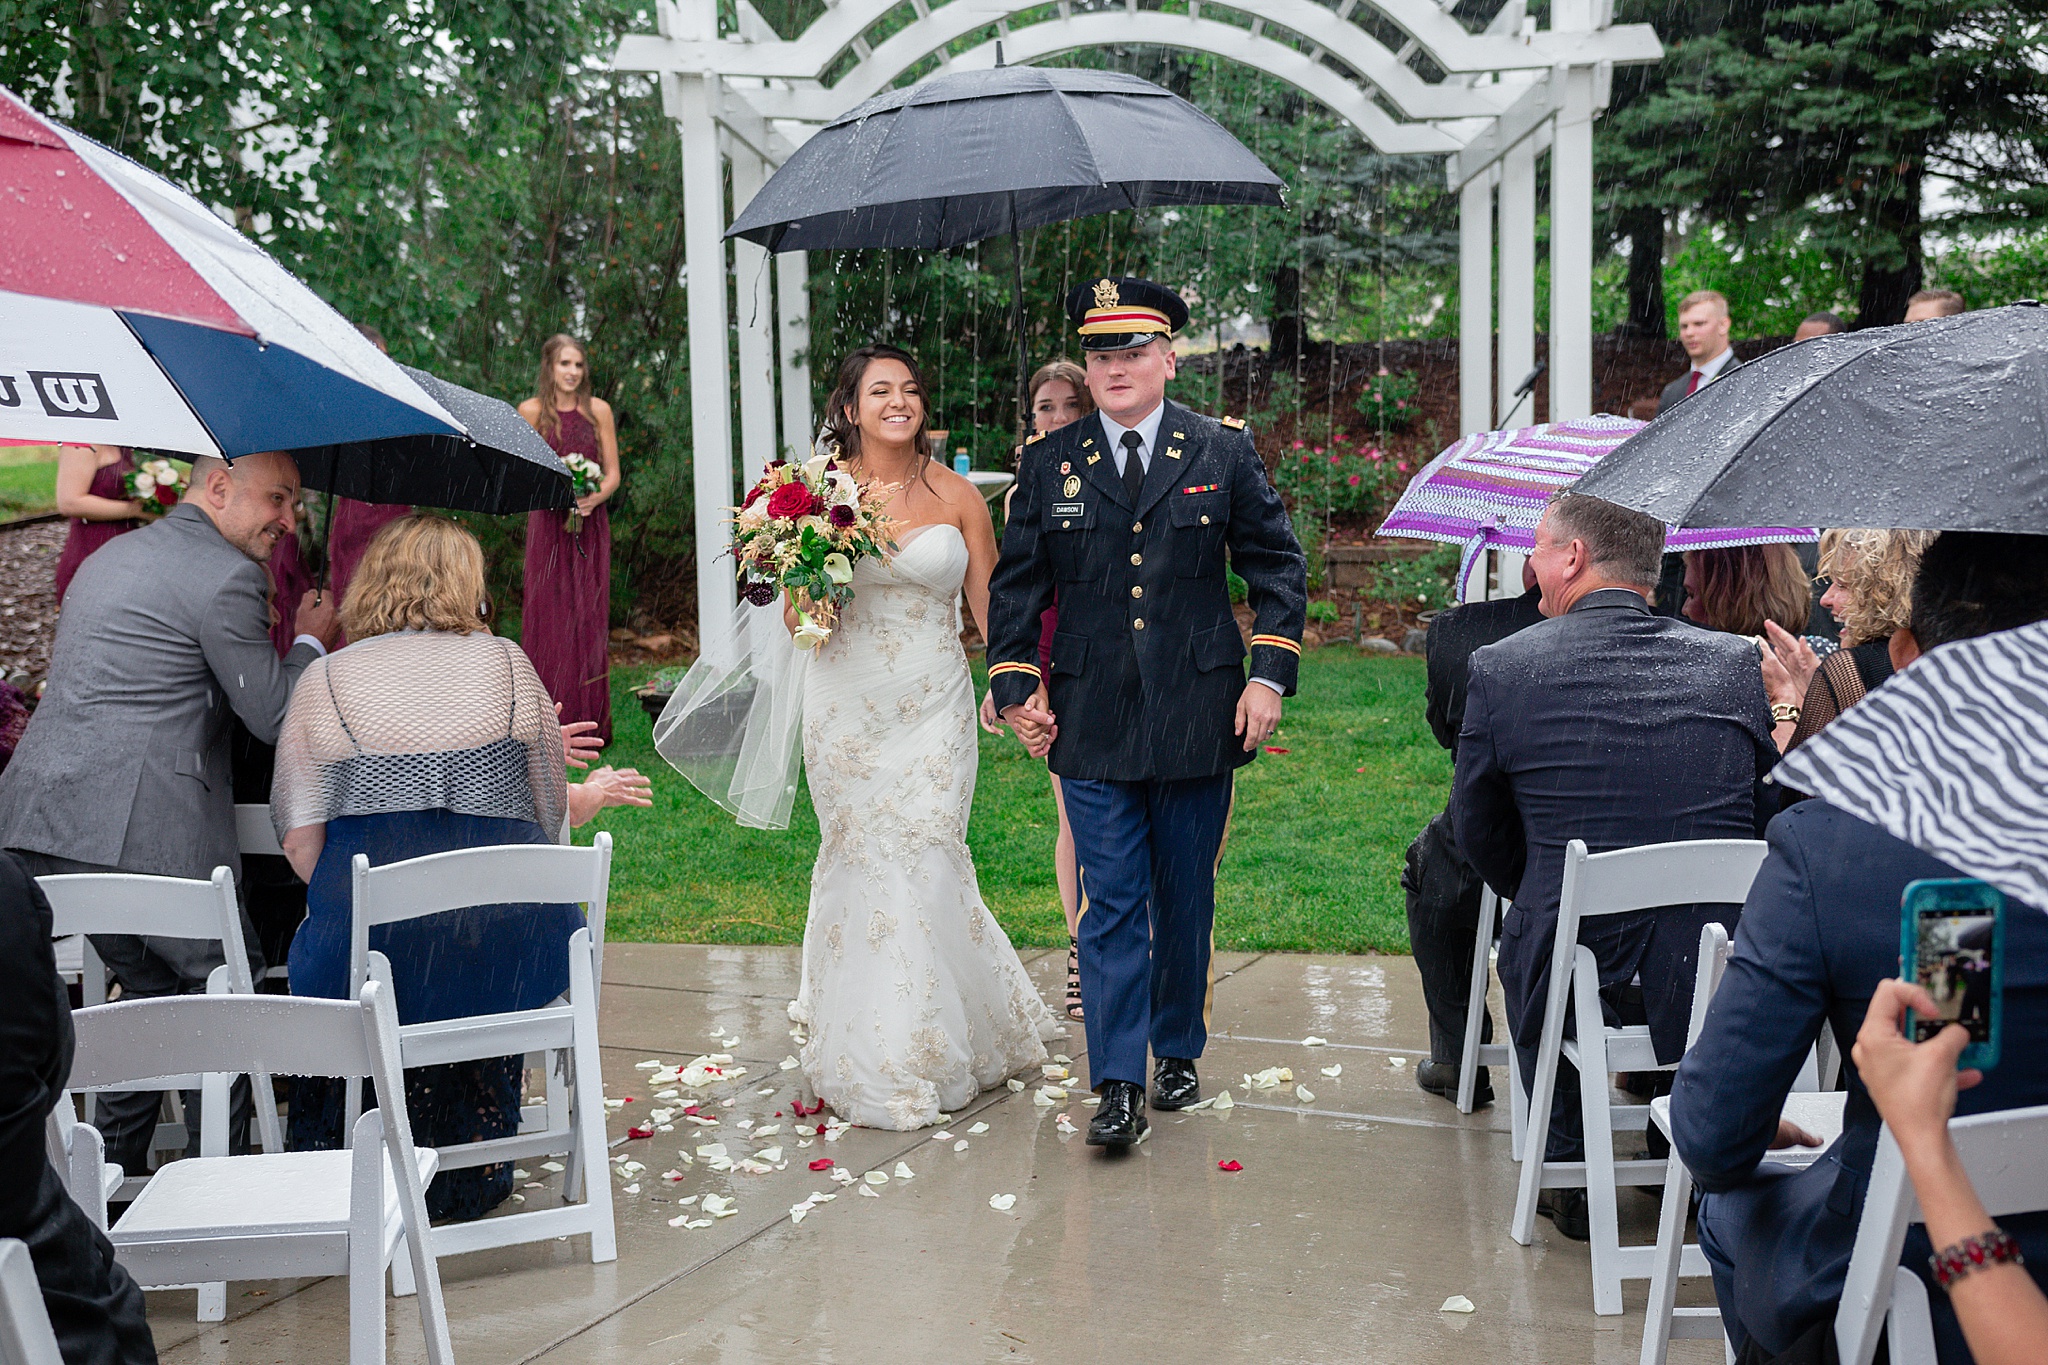 Bride & Groom walking up the aisle during a rainy summer wedding. Tania & Chris' Denver Wedding at the Wedgewood Ken Caryl by Colorado Wedding Photography, Jennifer Garza. Colorado Wedding Photographer, Colorado Wedding Photography, Denver Wedding Photographer, Denver Wedding Photography, US Marine Corp Wedding, US Marine Corp, Military Wedding, US Marines, Wedgewood Weddings, Wedgewood Weddings Ken Caryl, Colorado Wedding, Denver Wedding, Wedding Photographer, Colorado Bride, Brides of Colorado